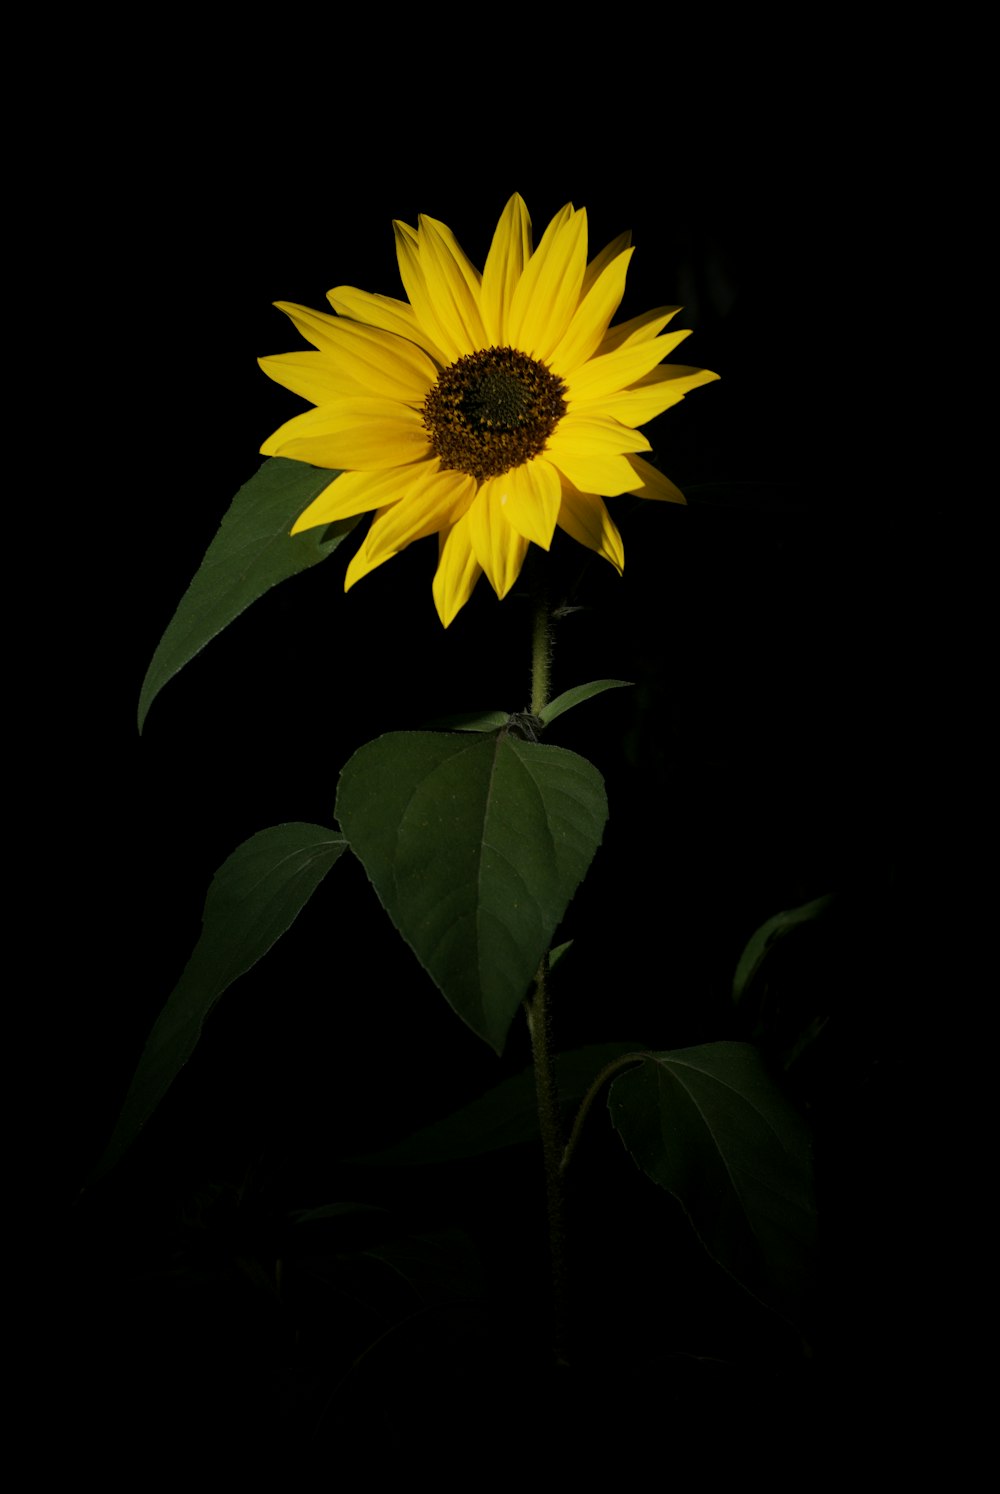 a large sunflower with green leaves on a black background